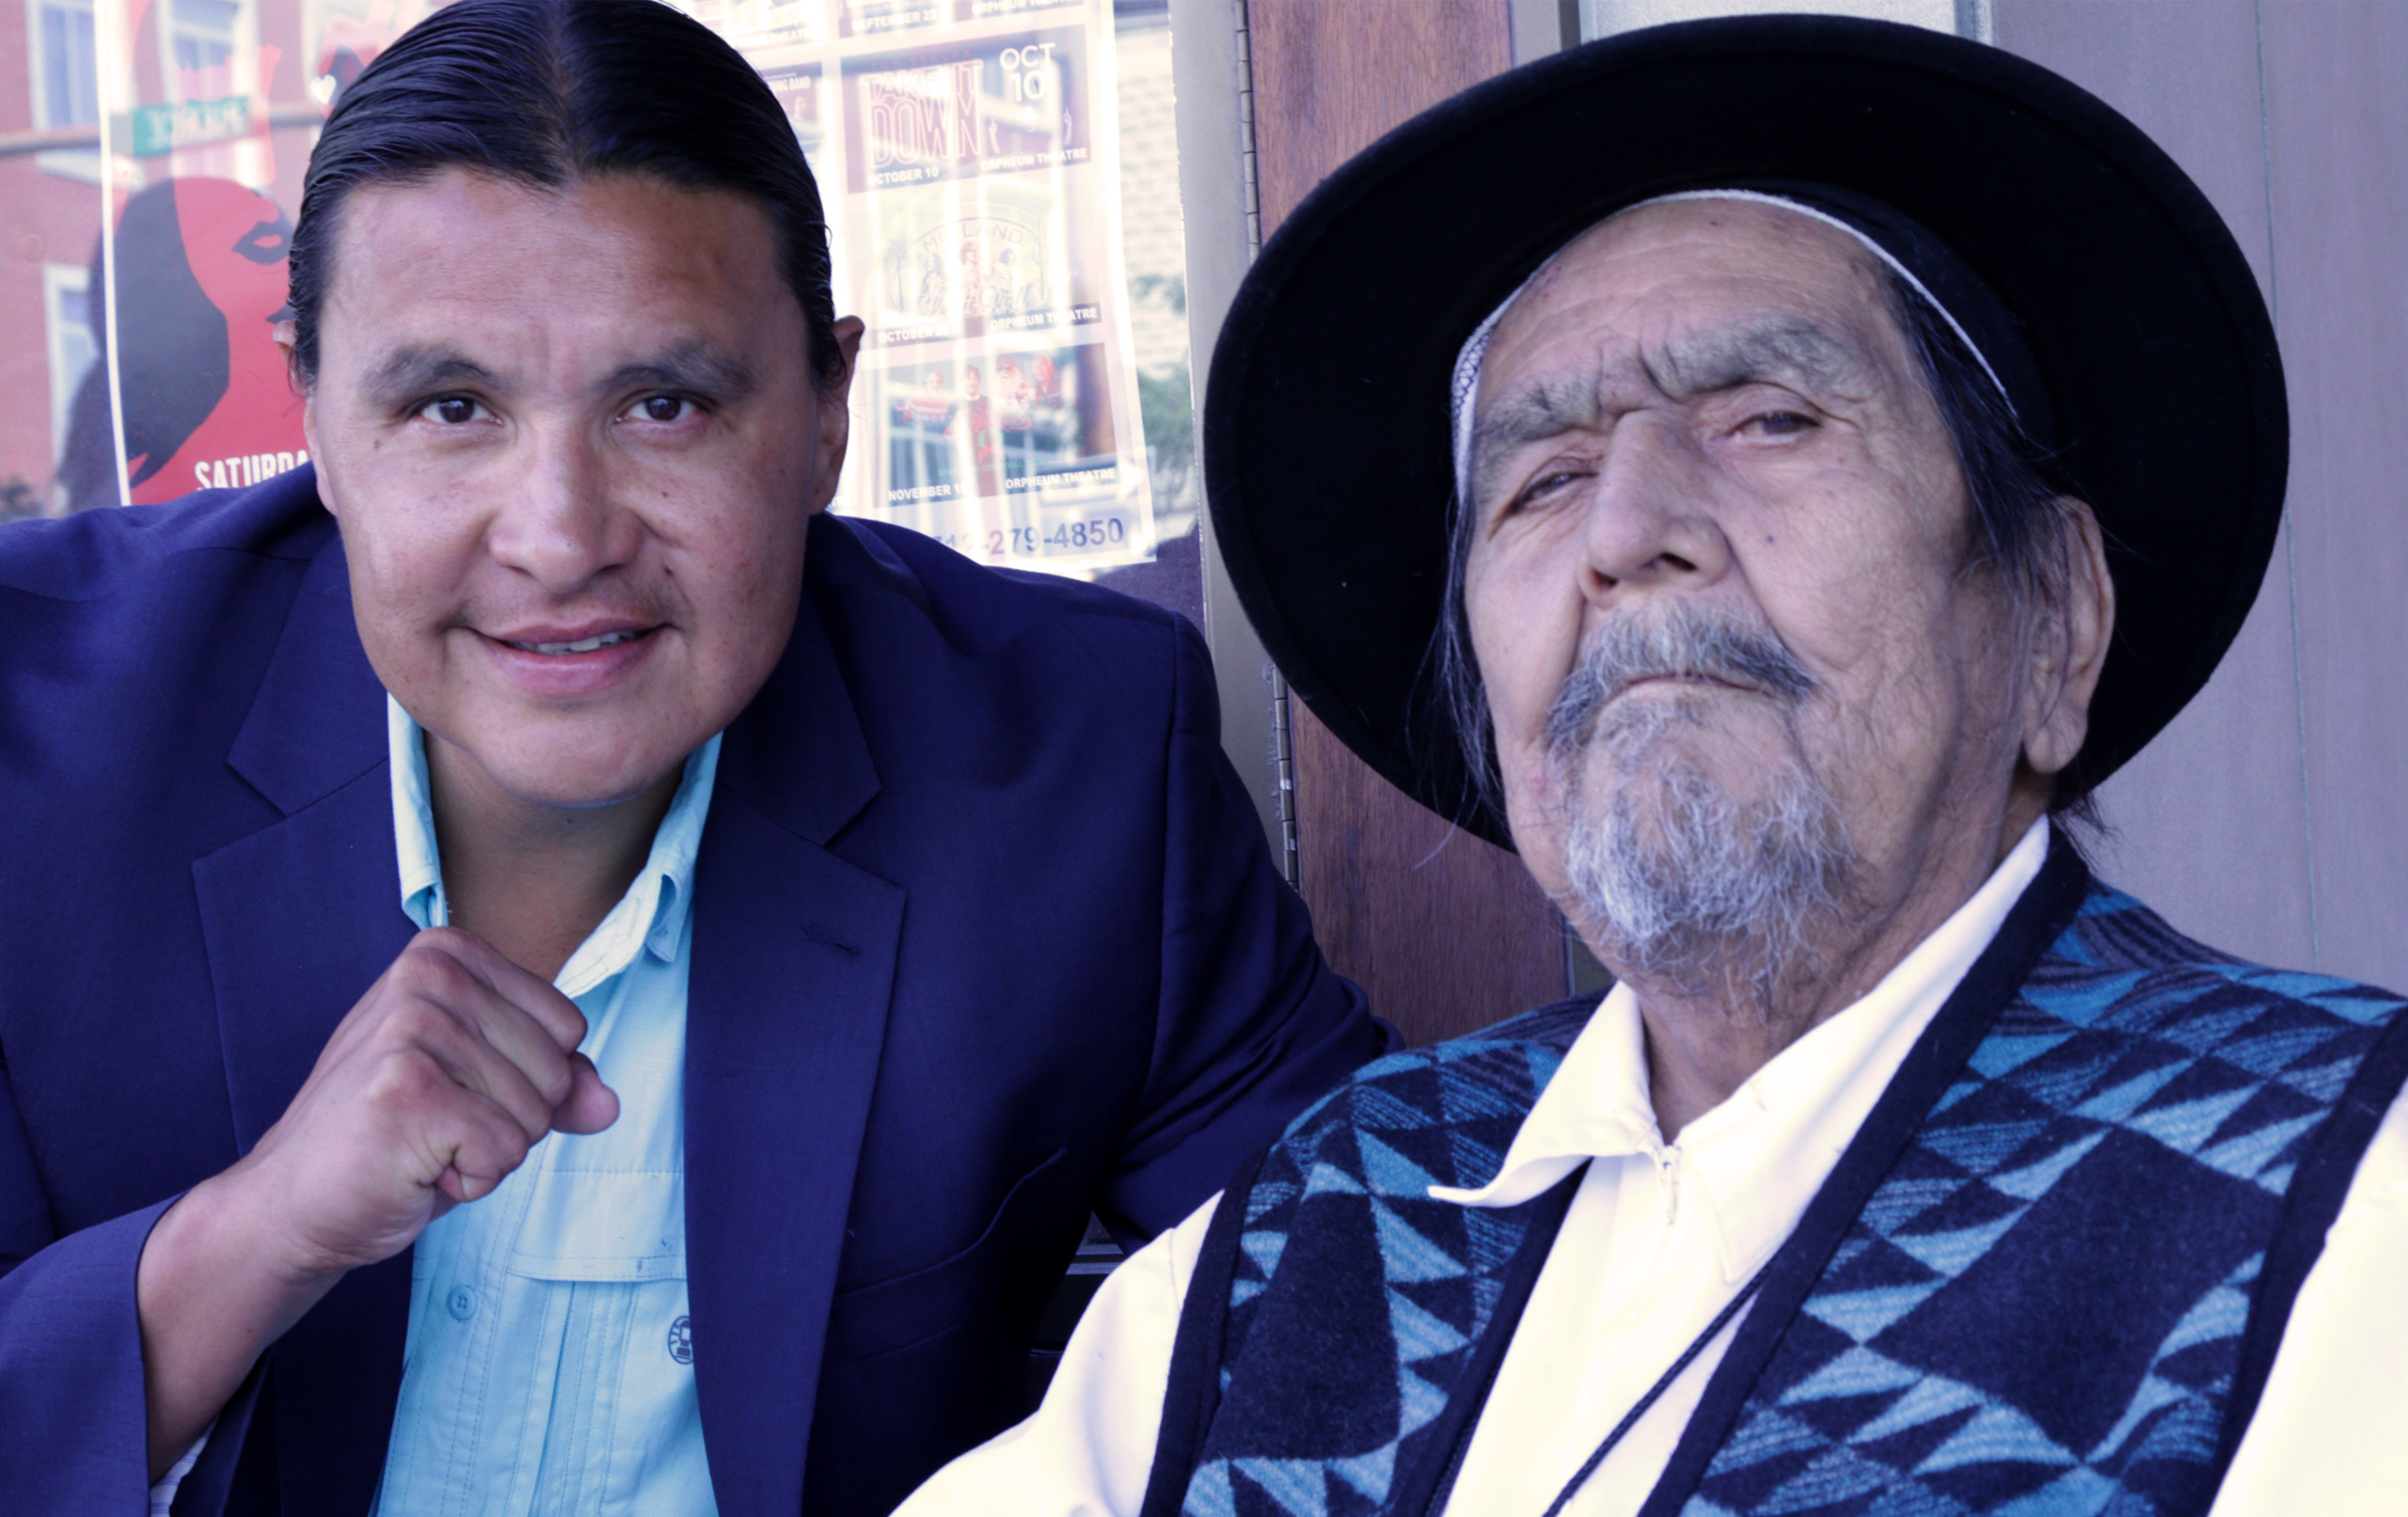 Chase Iron Eyes and Melvin Lee